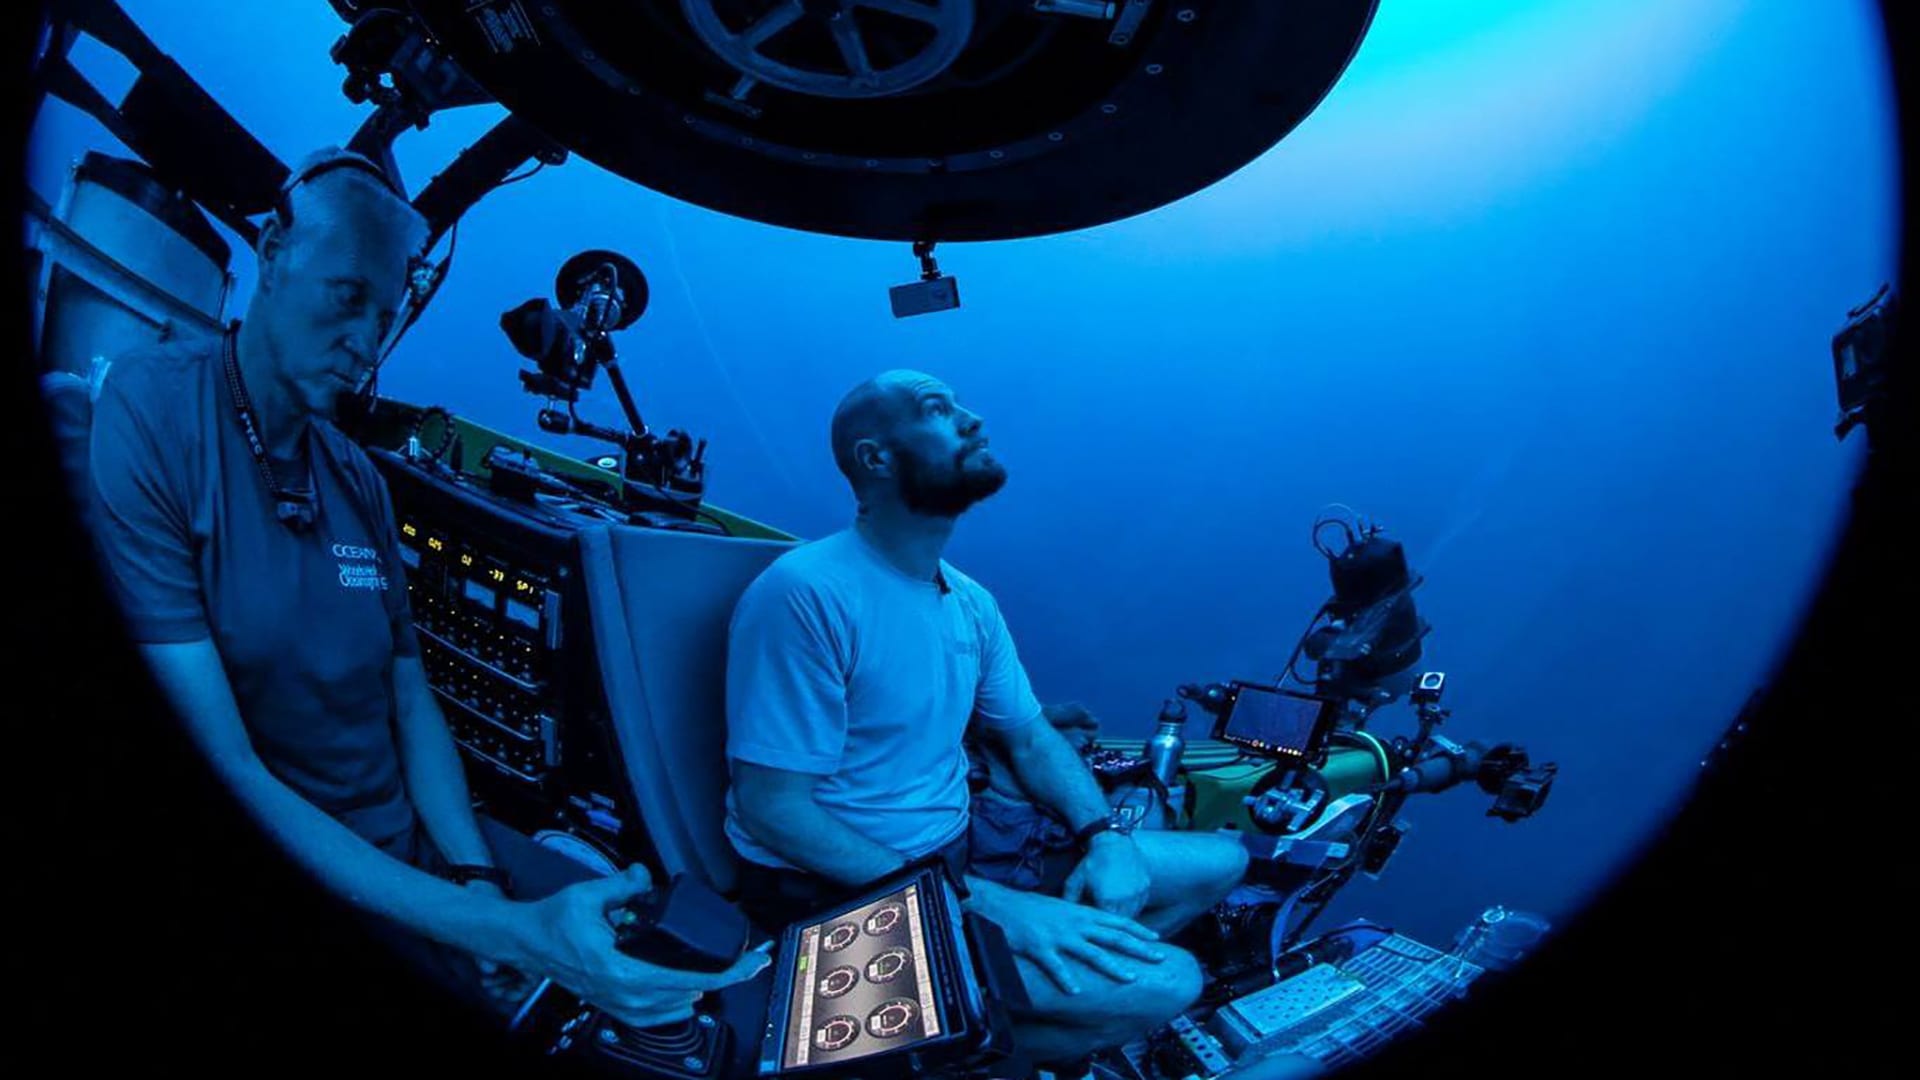 Paul Caiger descends to the ocean twilight zone on the OceanX submersible, Nadir, with pilot Alan Scott at the controls. (Photo by © OceanX Media)